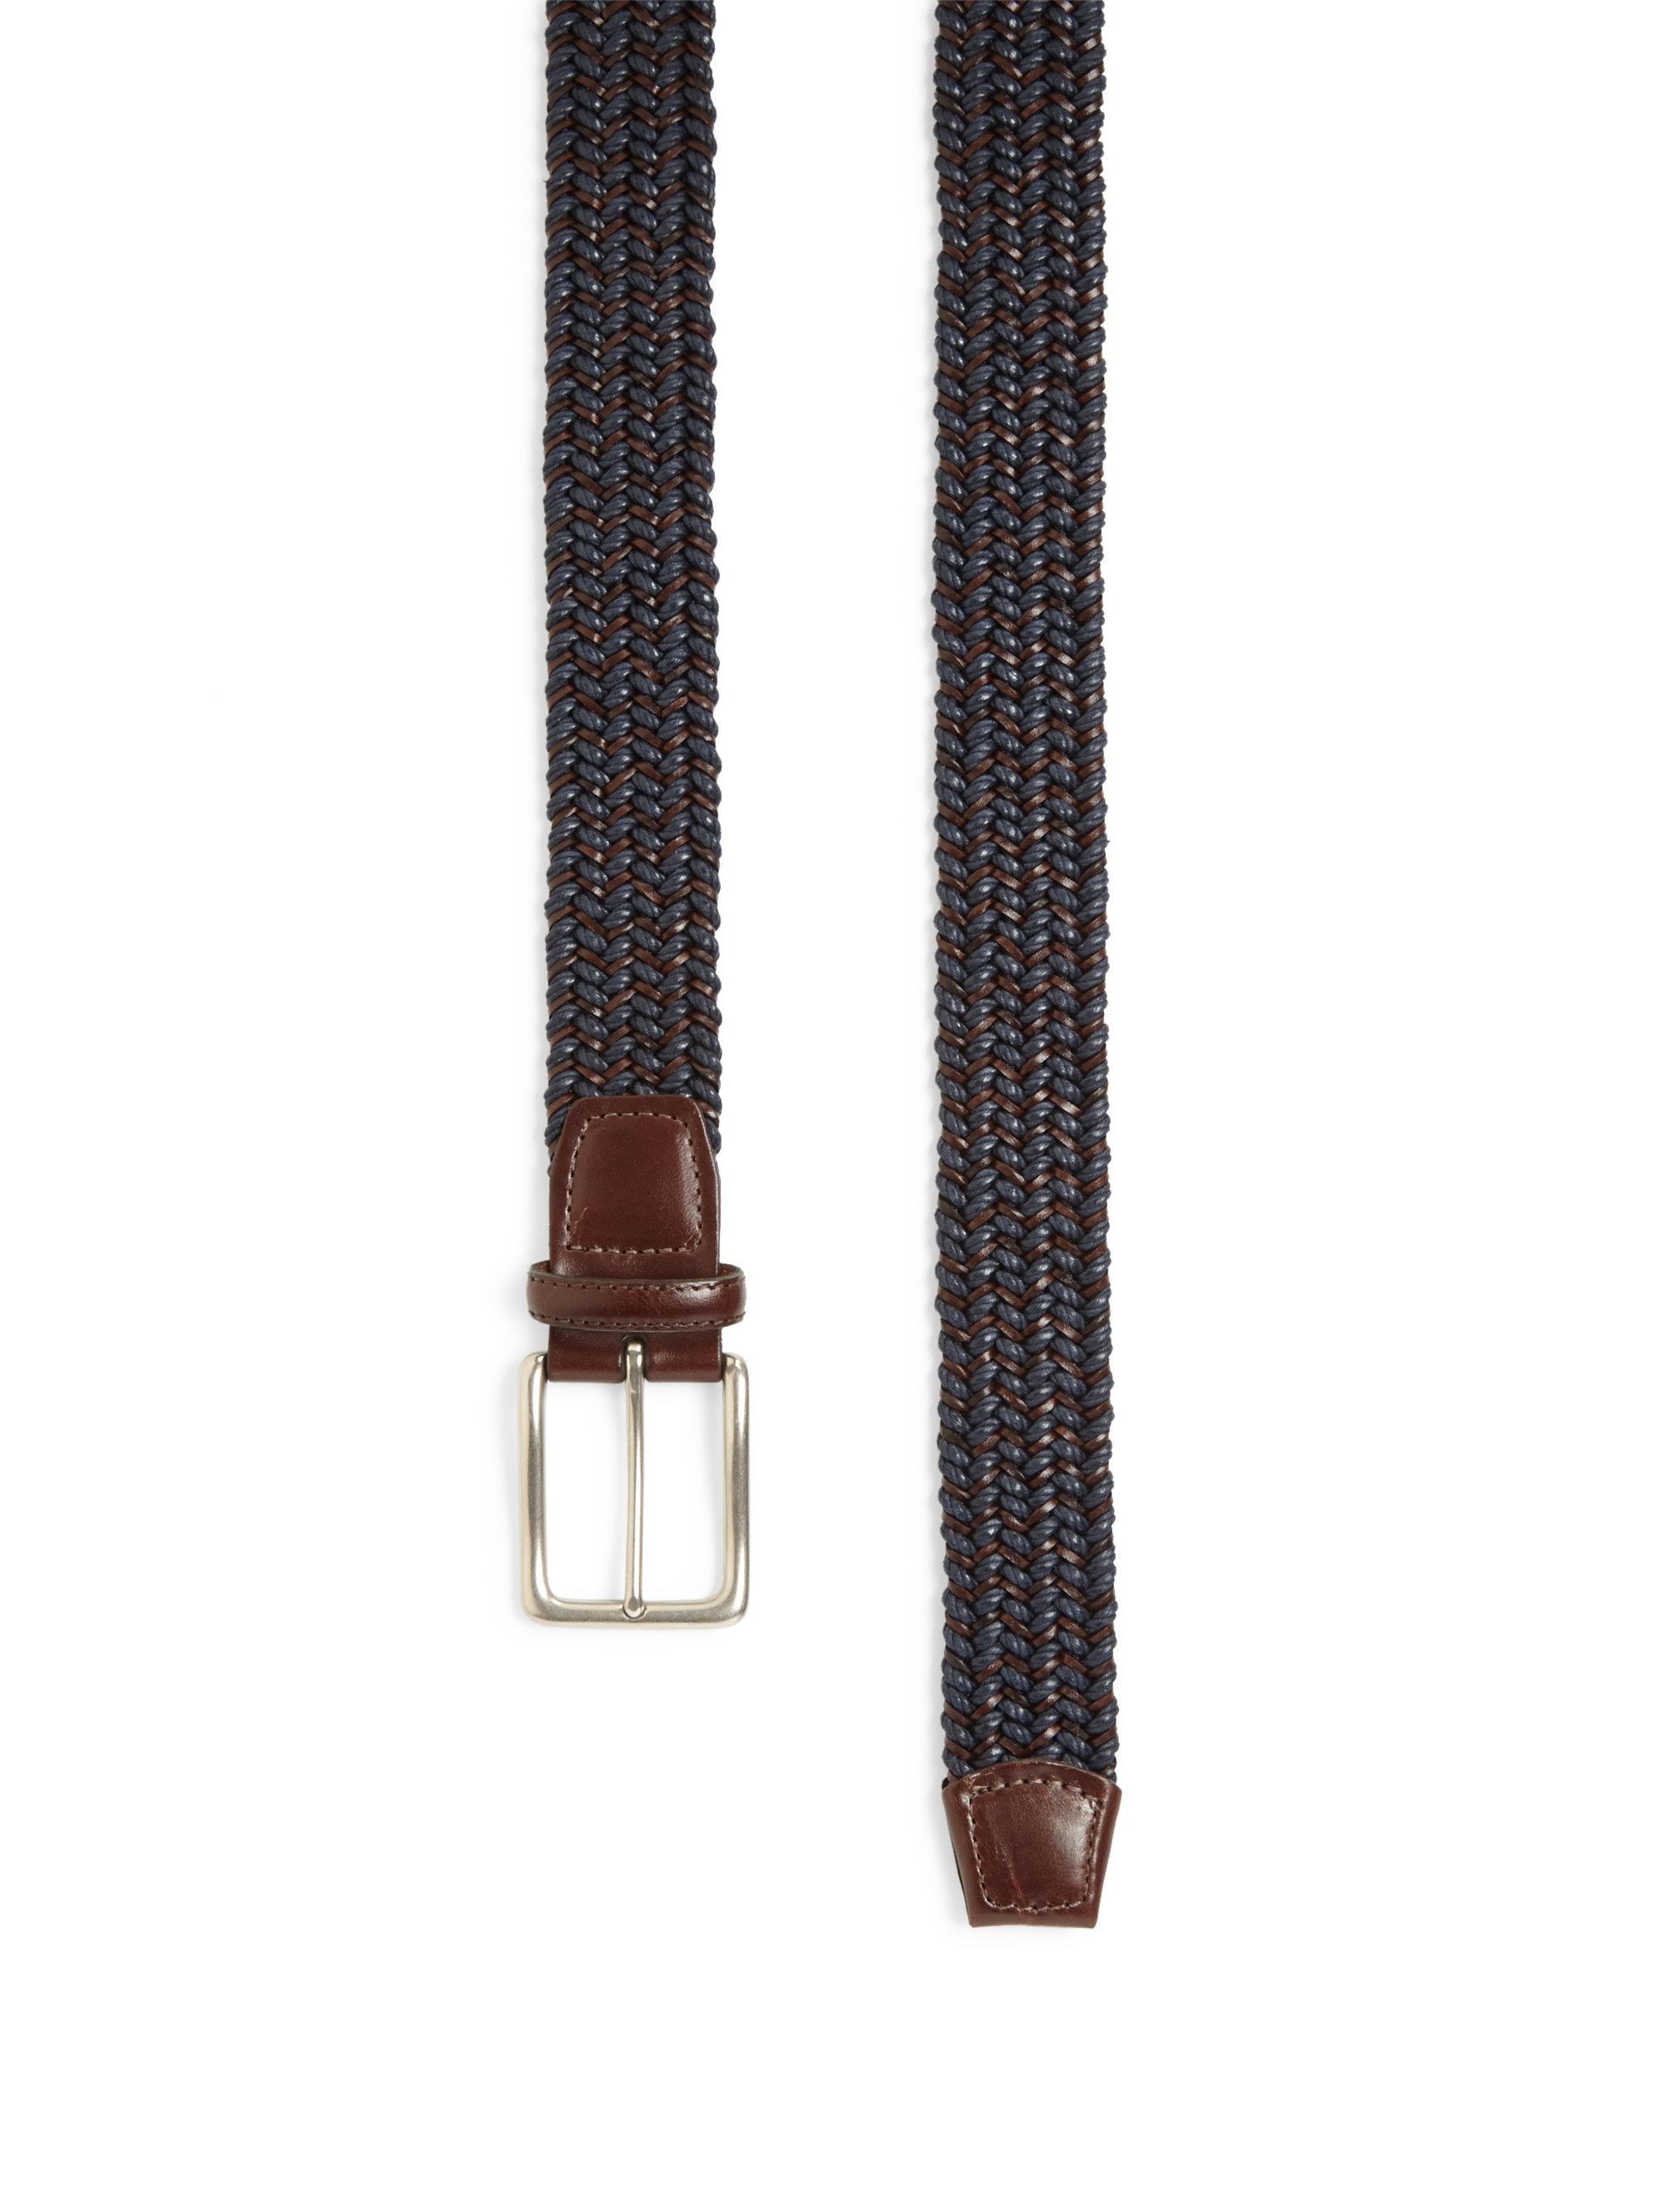 Saks Fifth Avenue Braided Leather Belt in Navy (Blue) for Men - Lyst